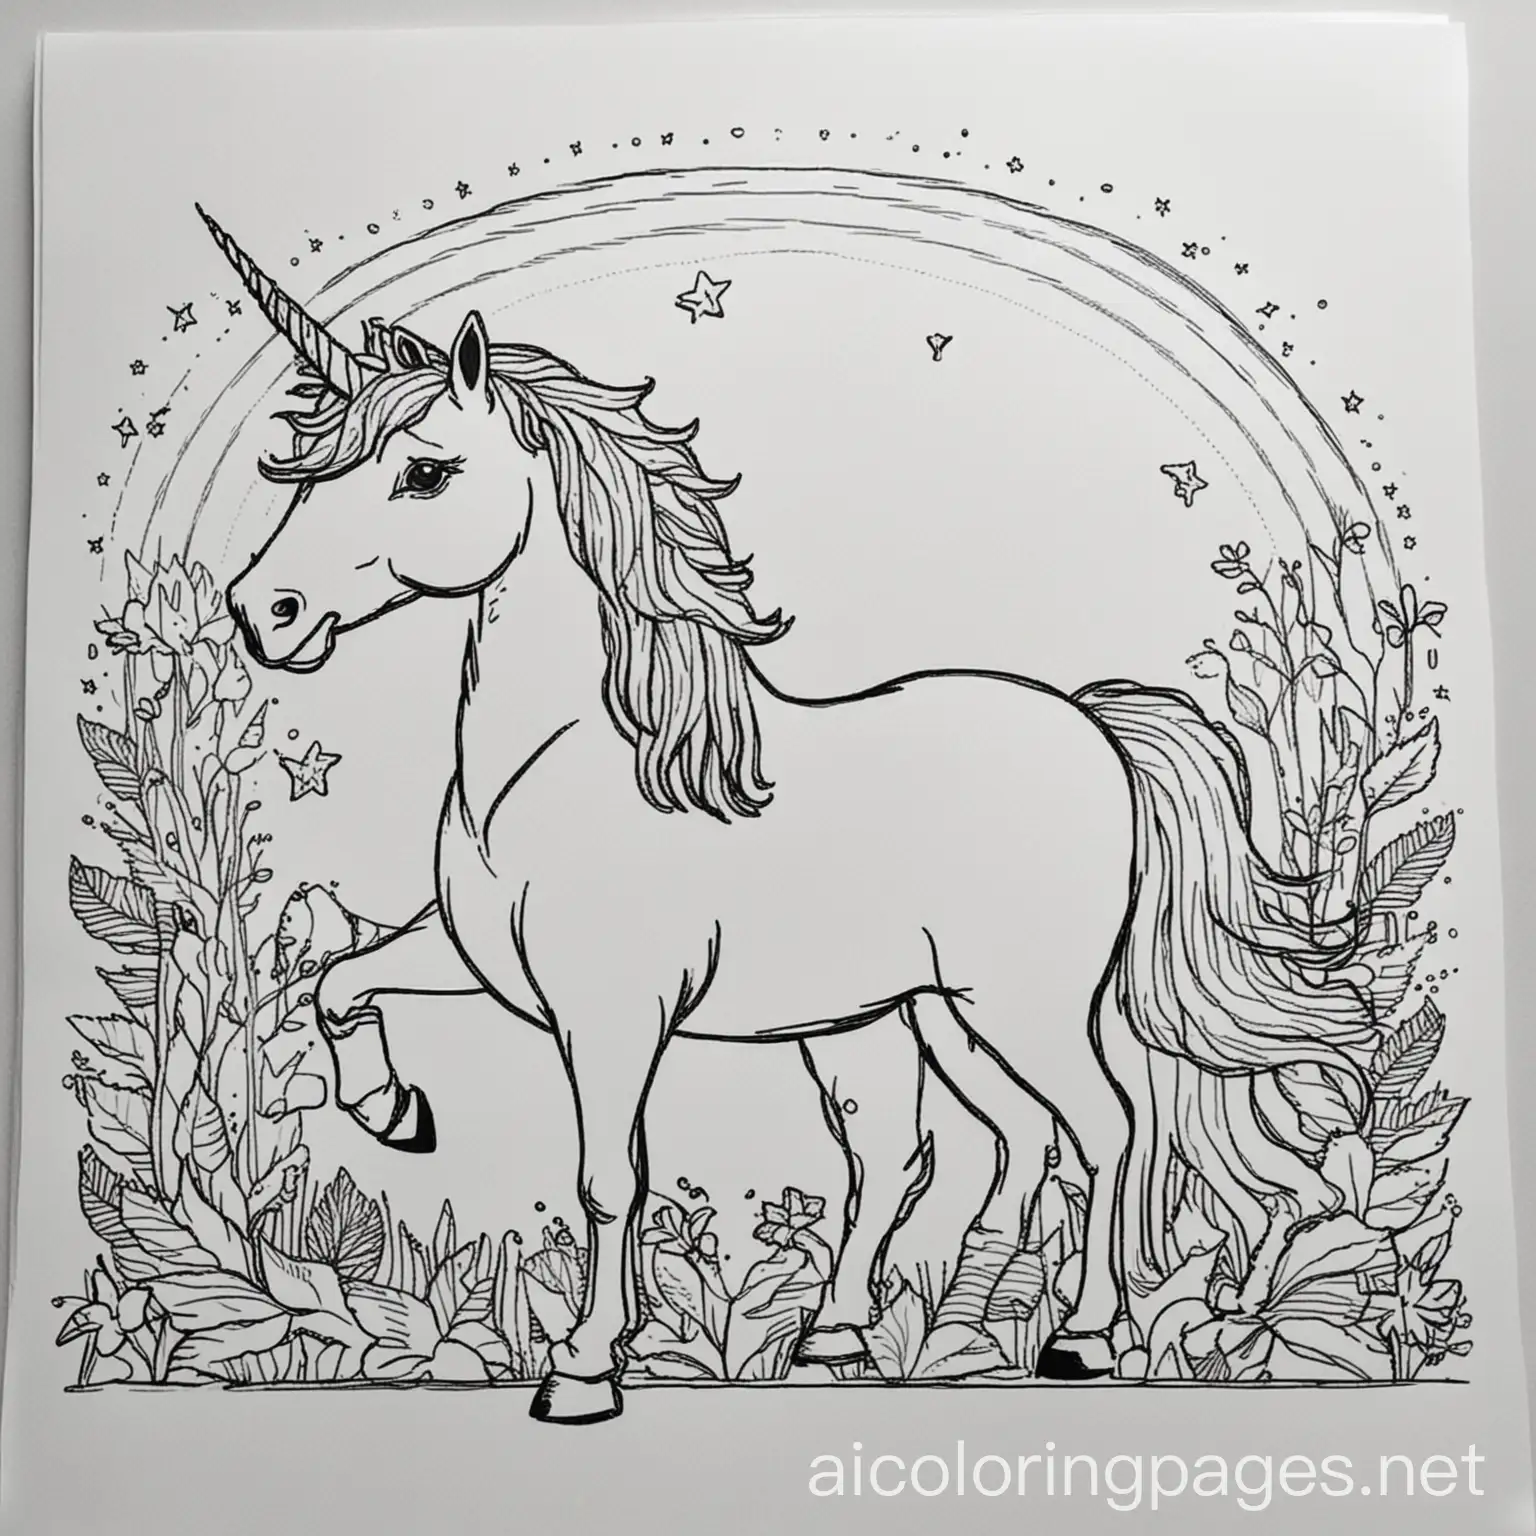 Unicorns, Coloring Page, black and white, line art, white background, Simplicity, Ample White Space. The background of the coloring page is plain white to make it easy for young children to color within the lines. The outlines of all the subjects are easy to distinguish, making it simple for kids to color without too much difficulty